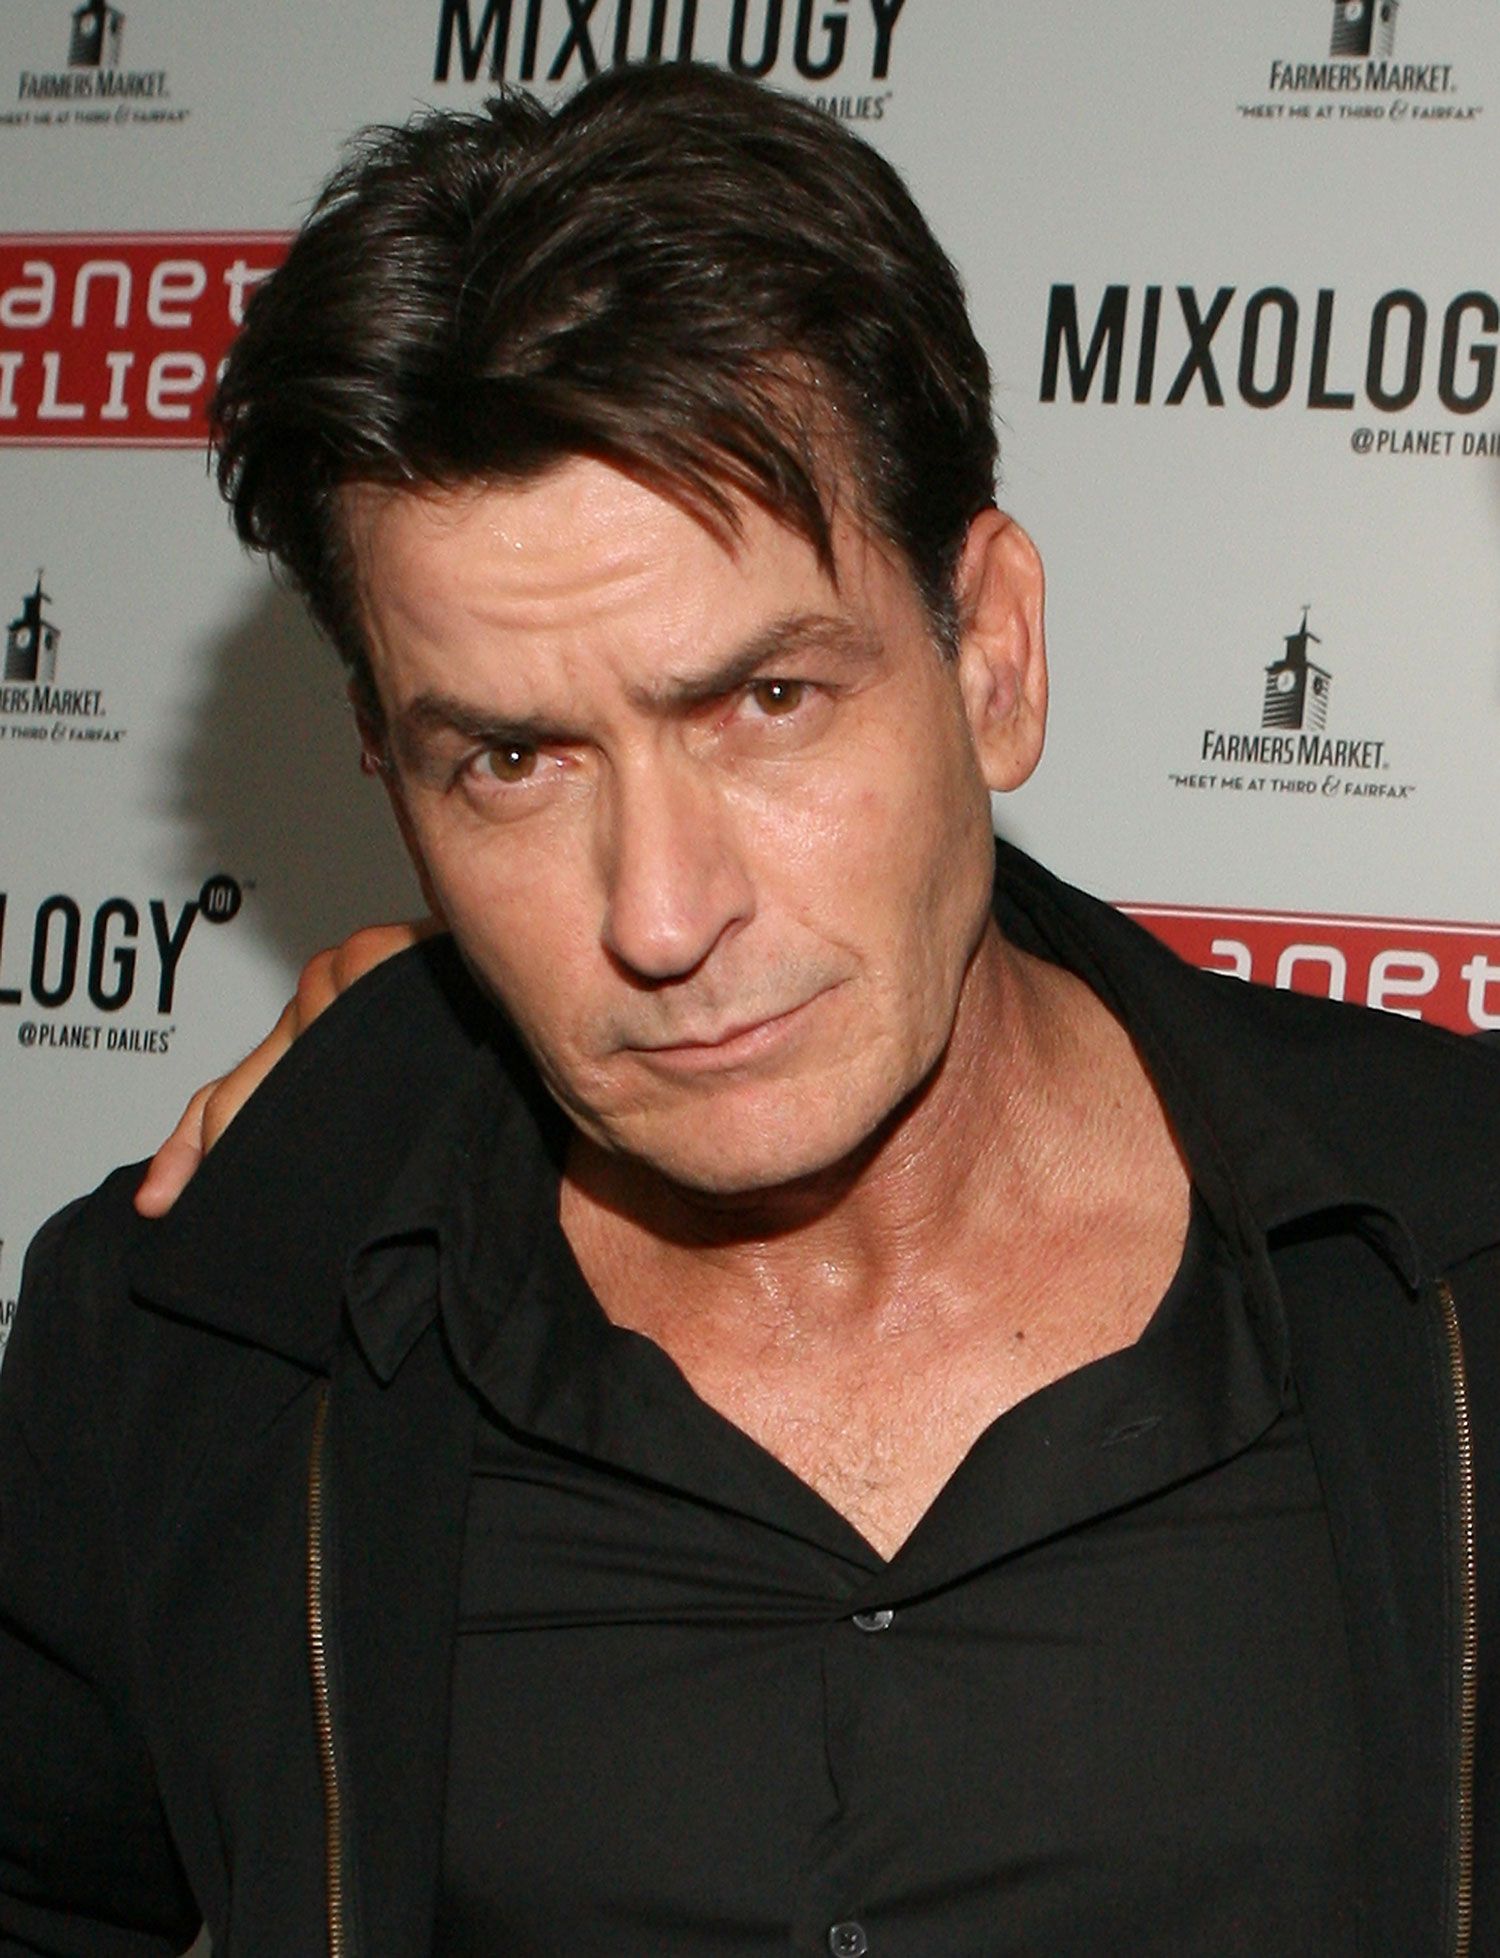 Charlie Sheen wants to return to 'Two and a Half Men' | wtsp.com